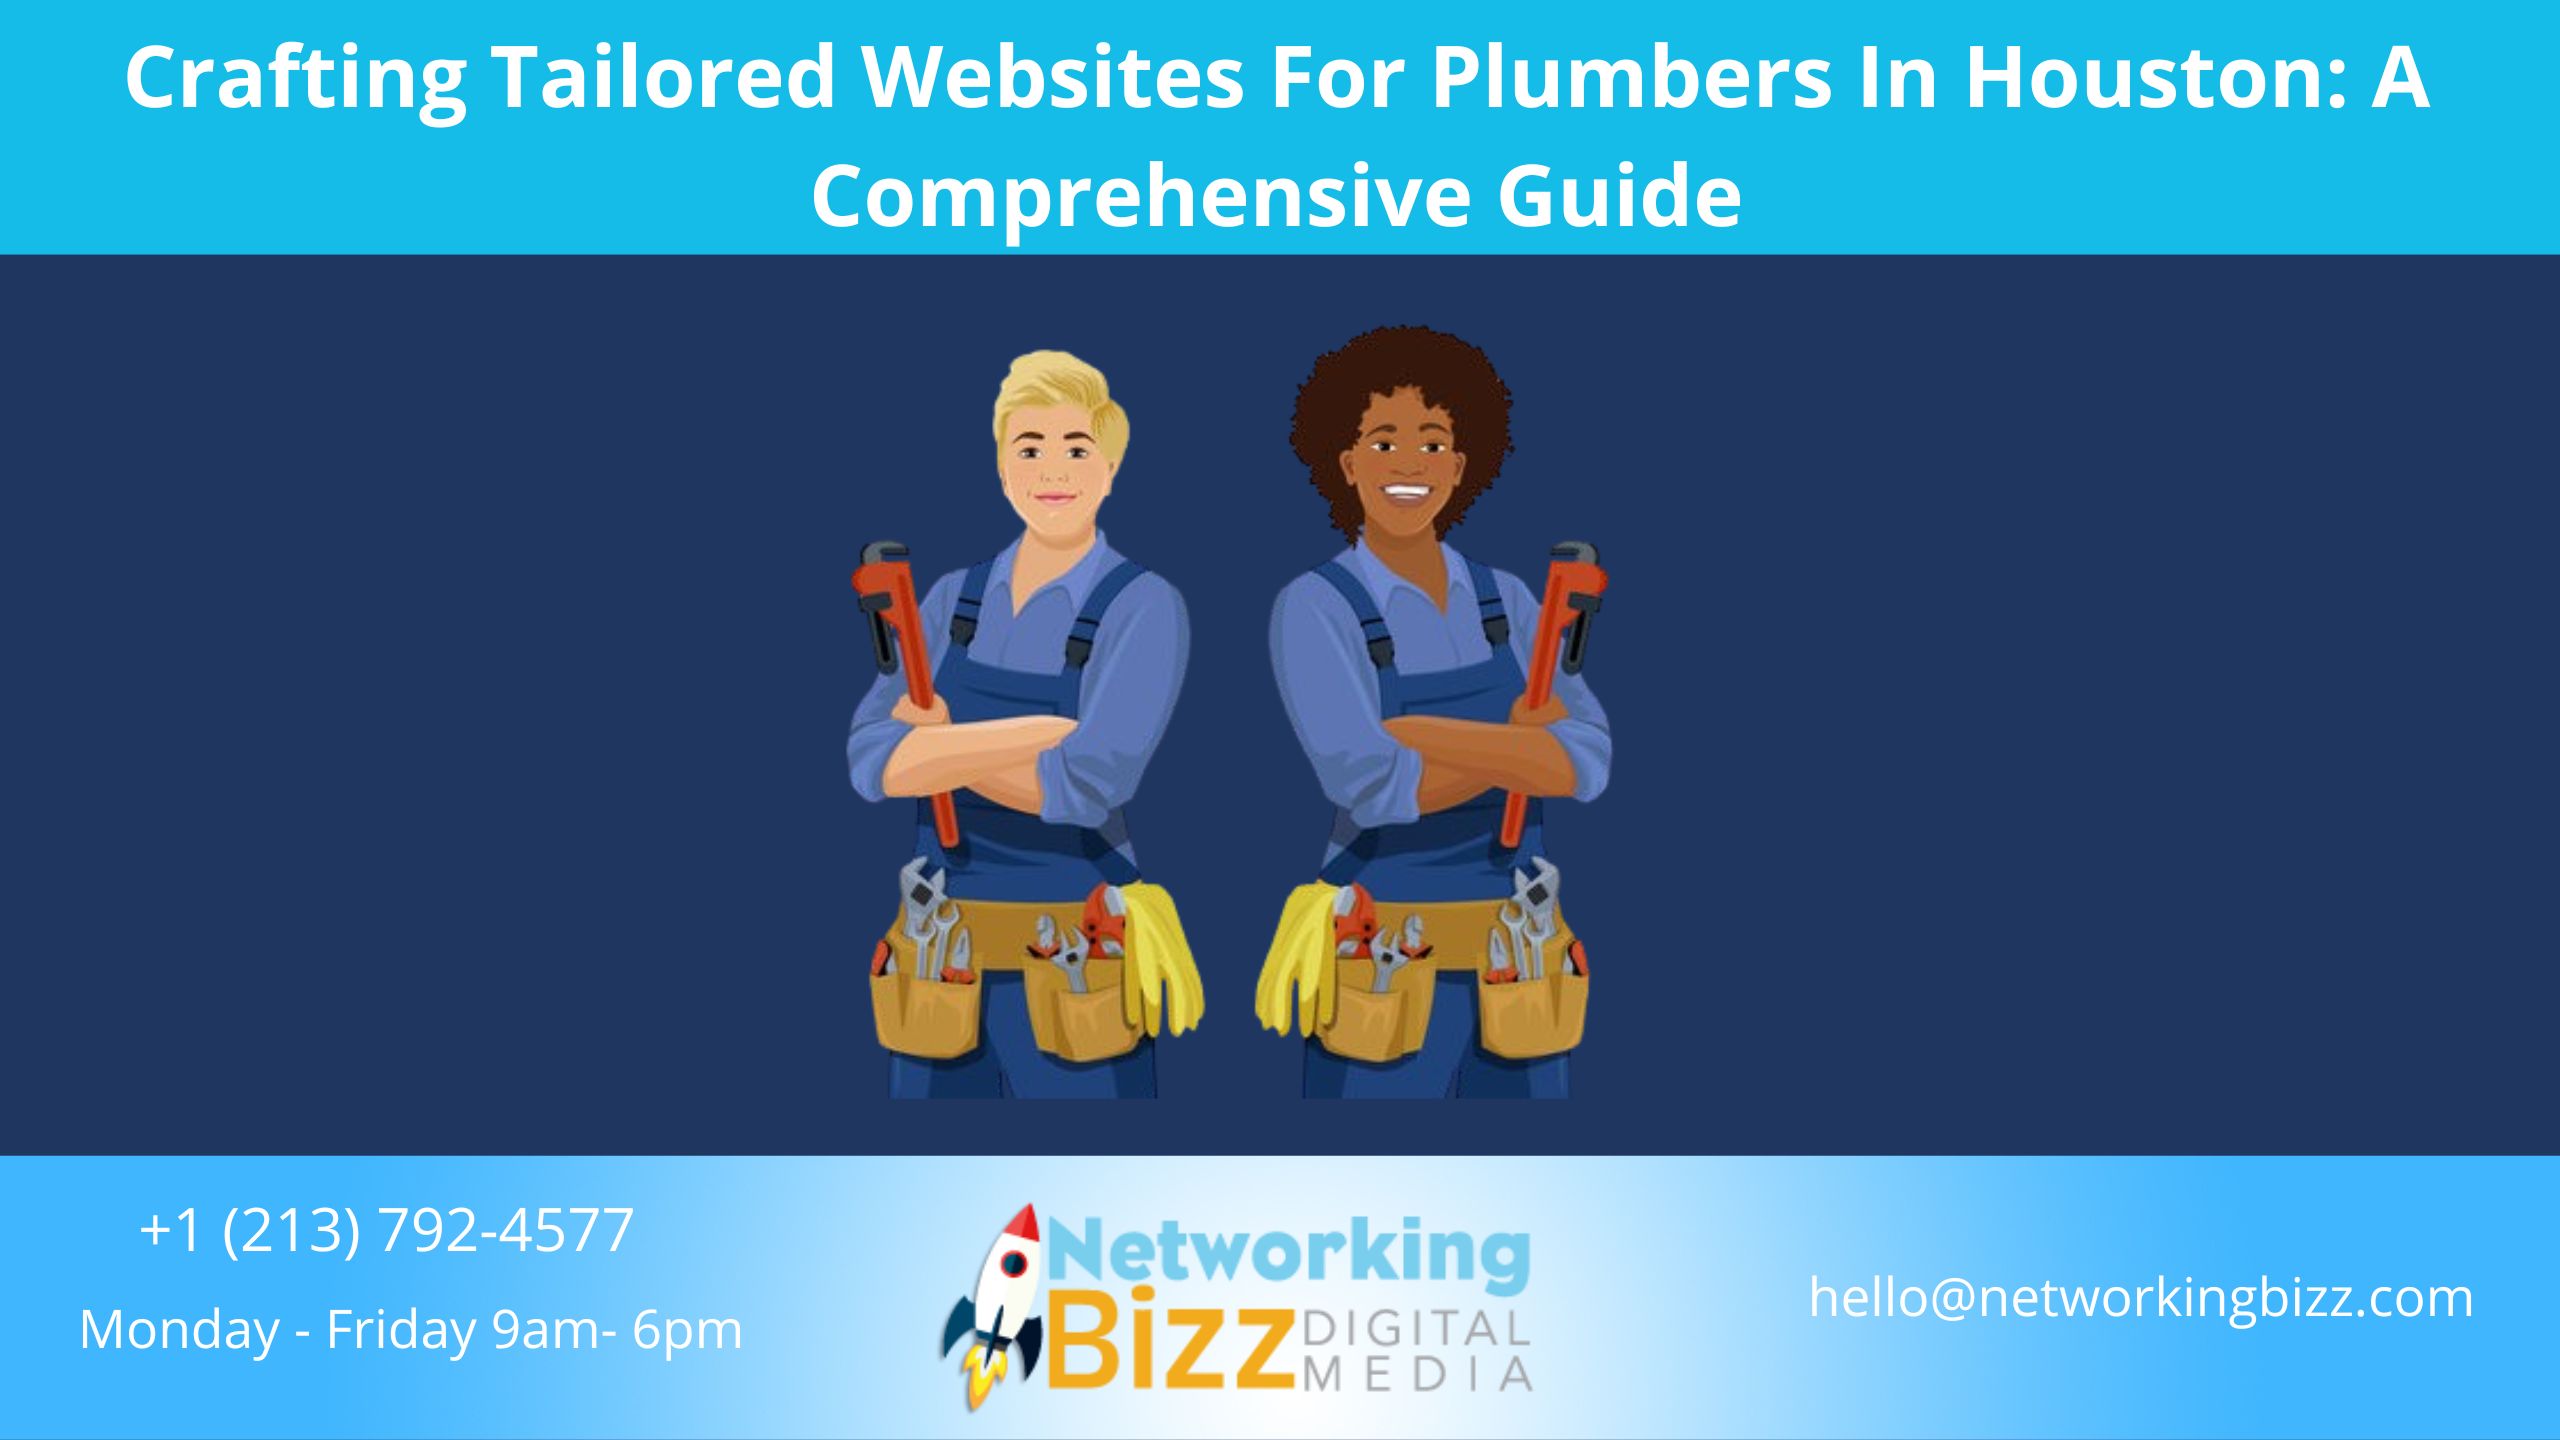 Crafting Tailored Websites For Plumbers In Houston: A Comprehensive Guide